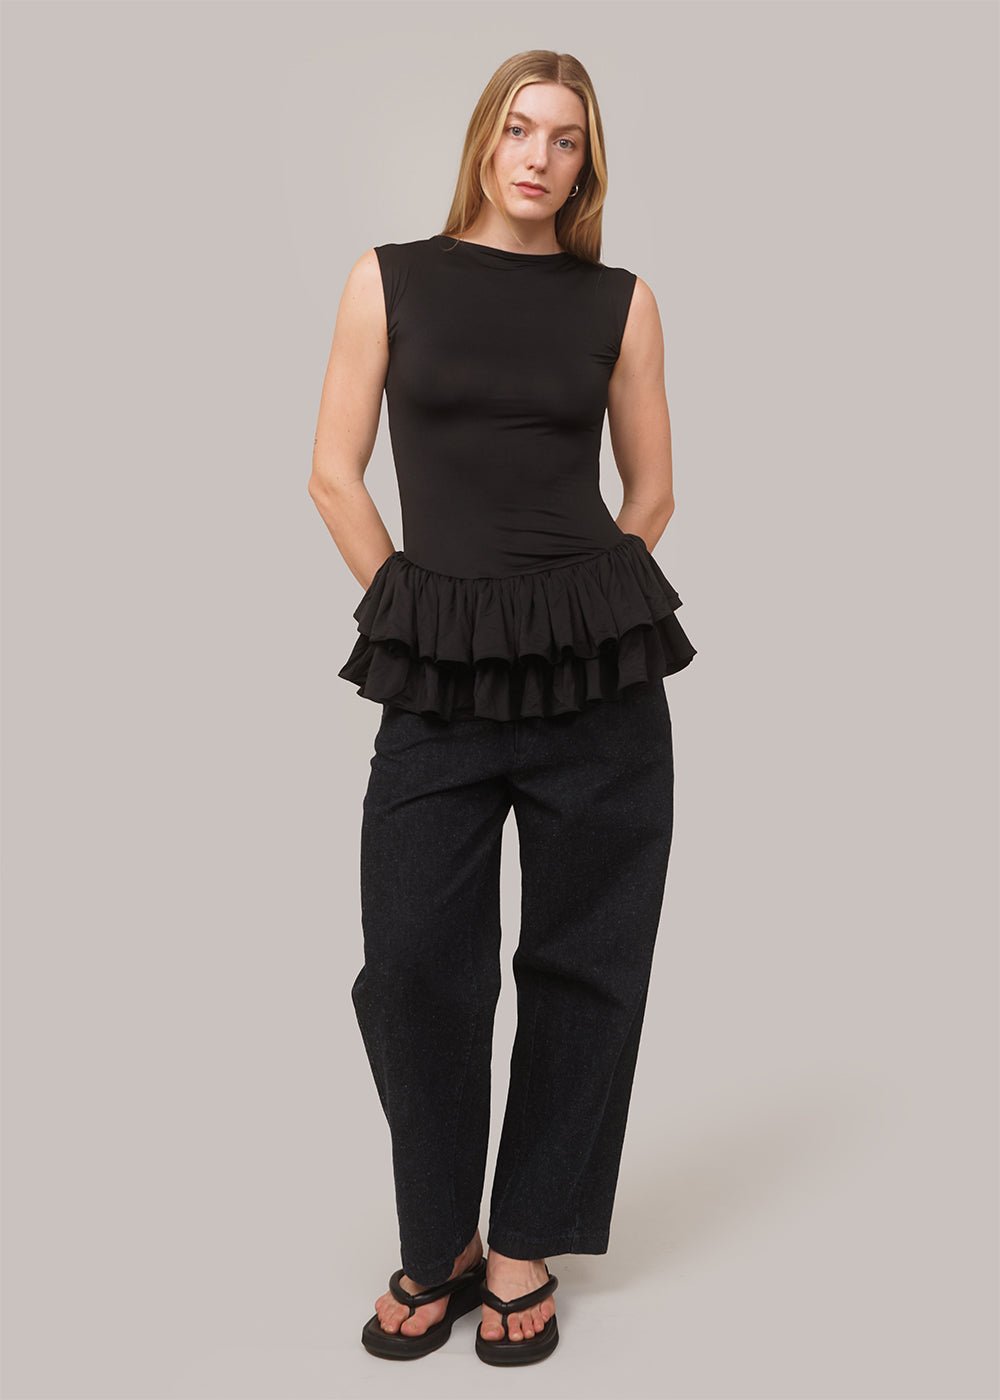 Belle The Label Black Ballerina Dress - New Classics Studios Sustainable Ethical Fashion Canada